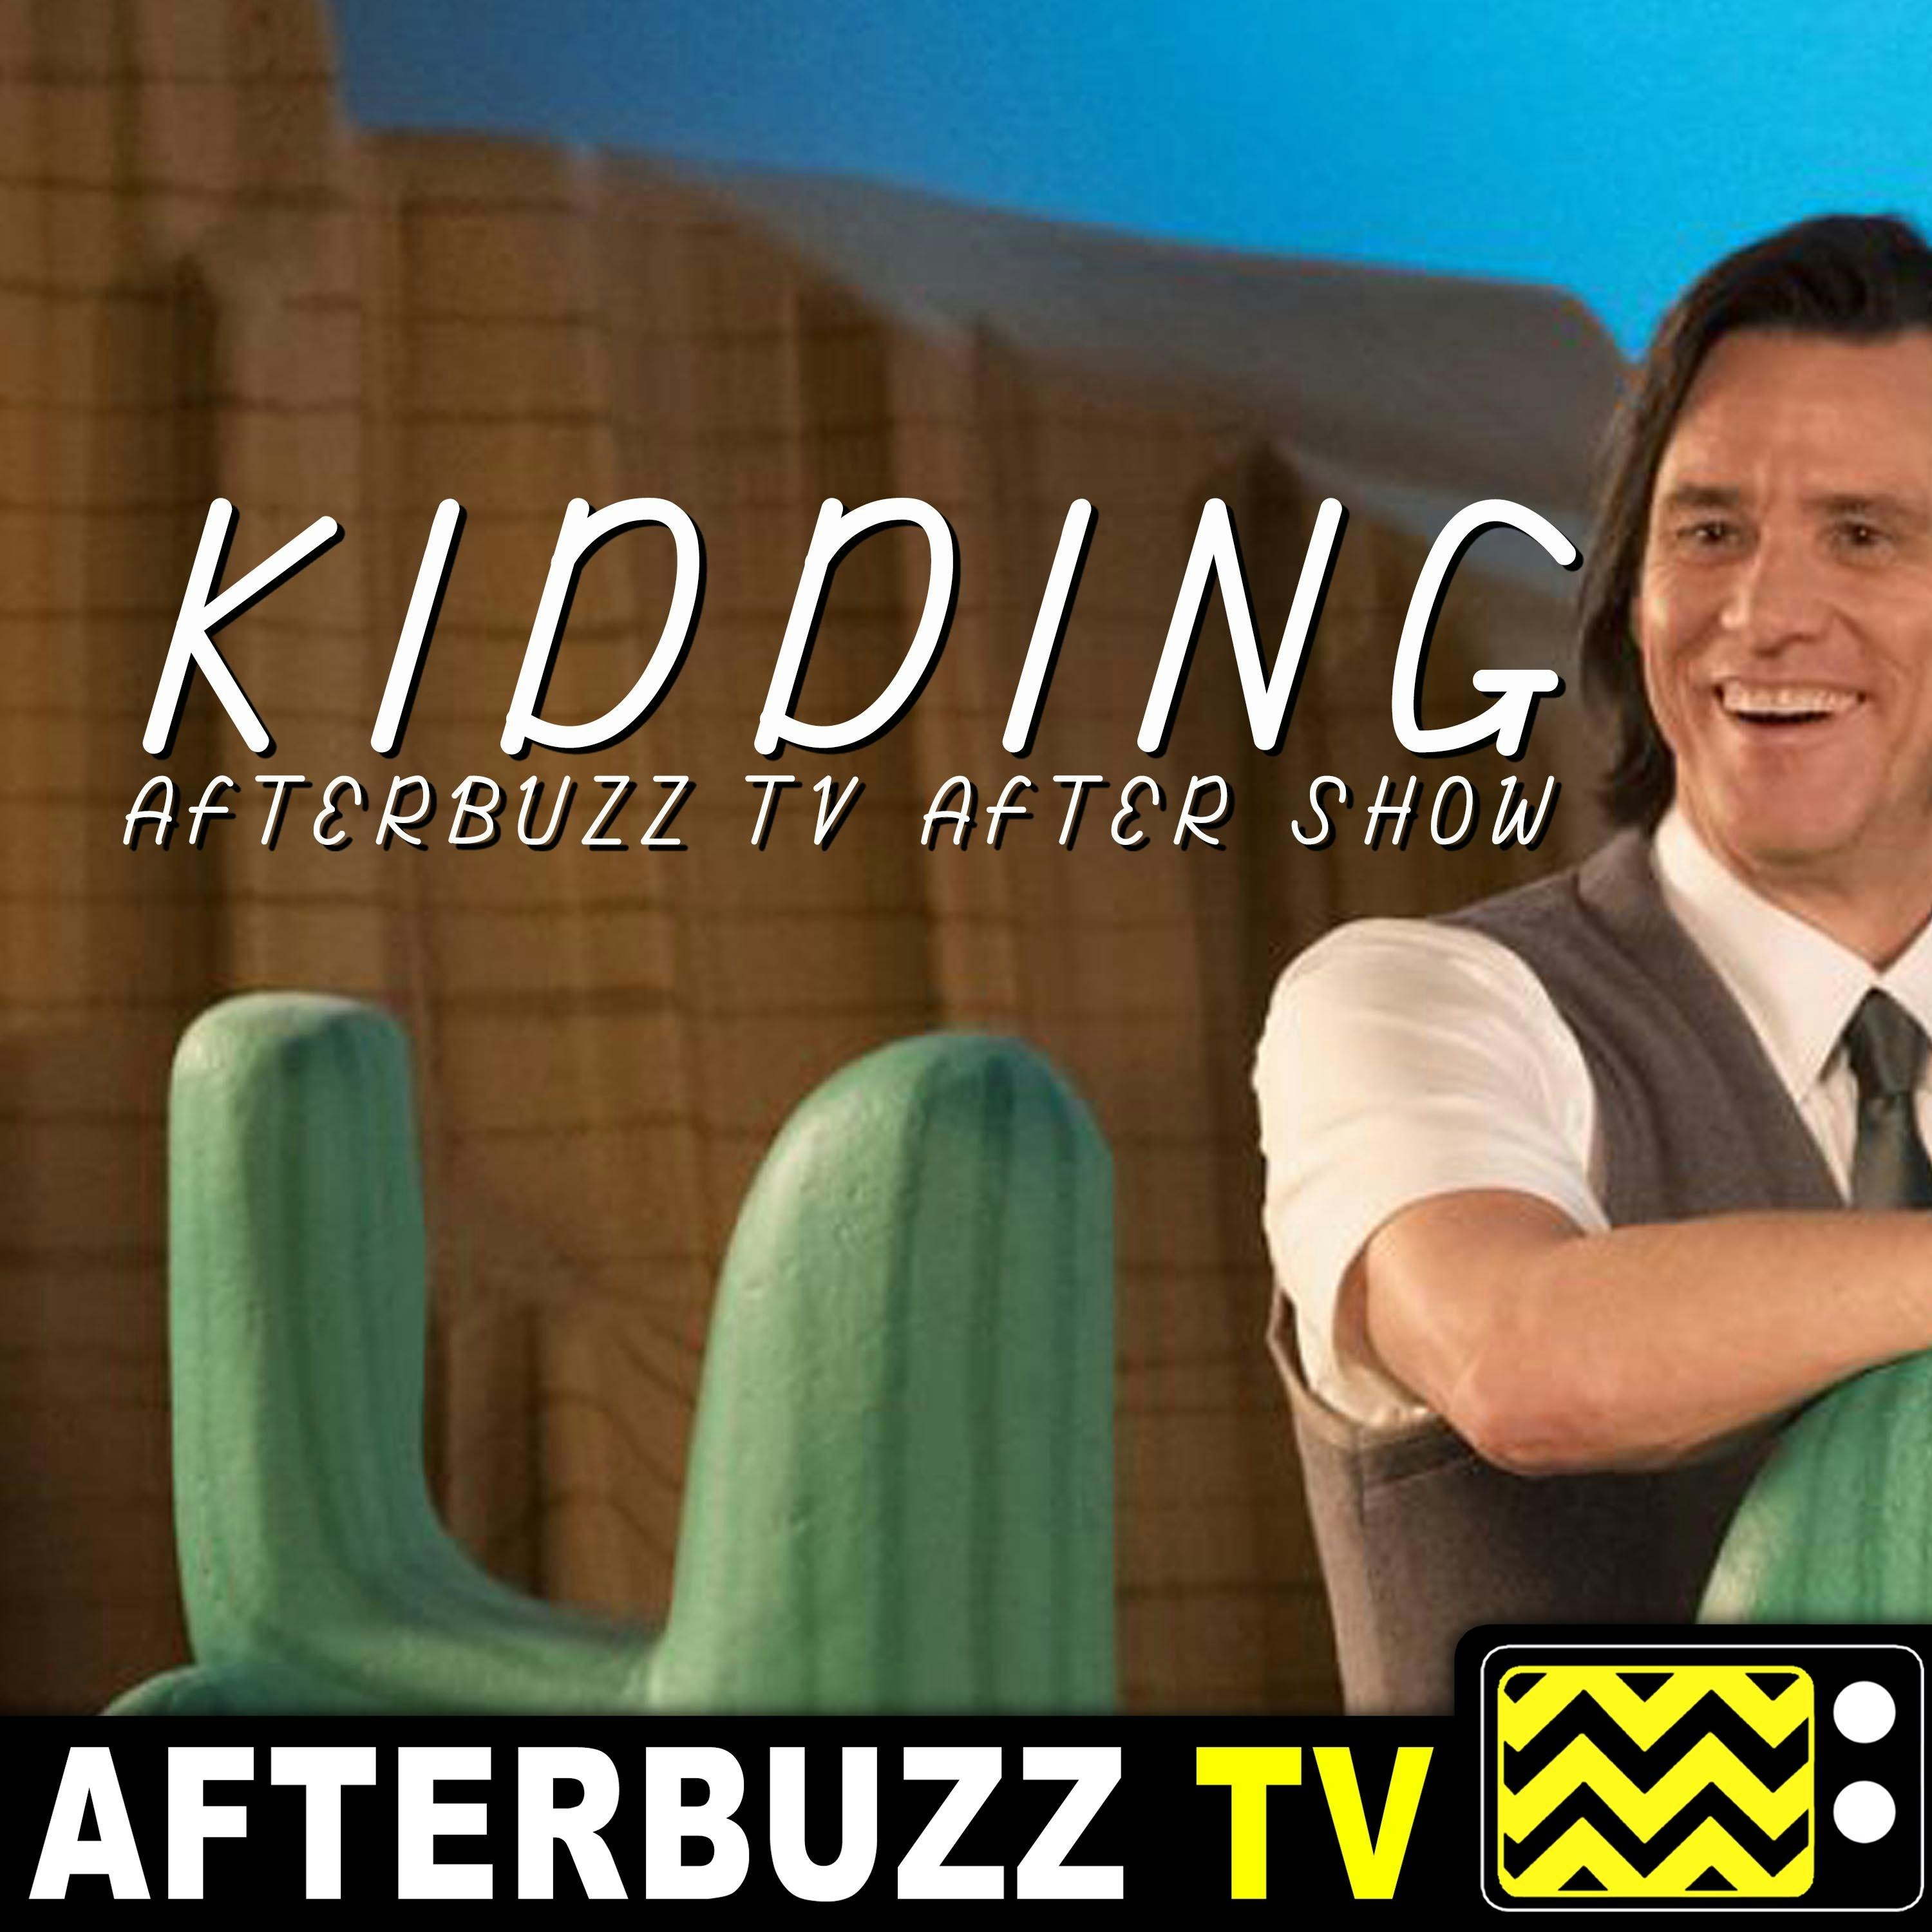 Kidding S:1 | Green Means Go E:1 | AfterBuzz TV AfterShow